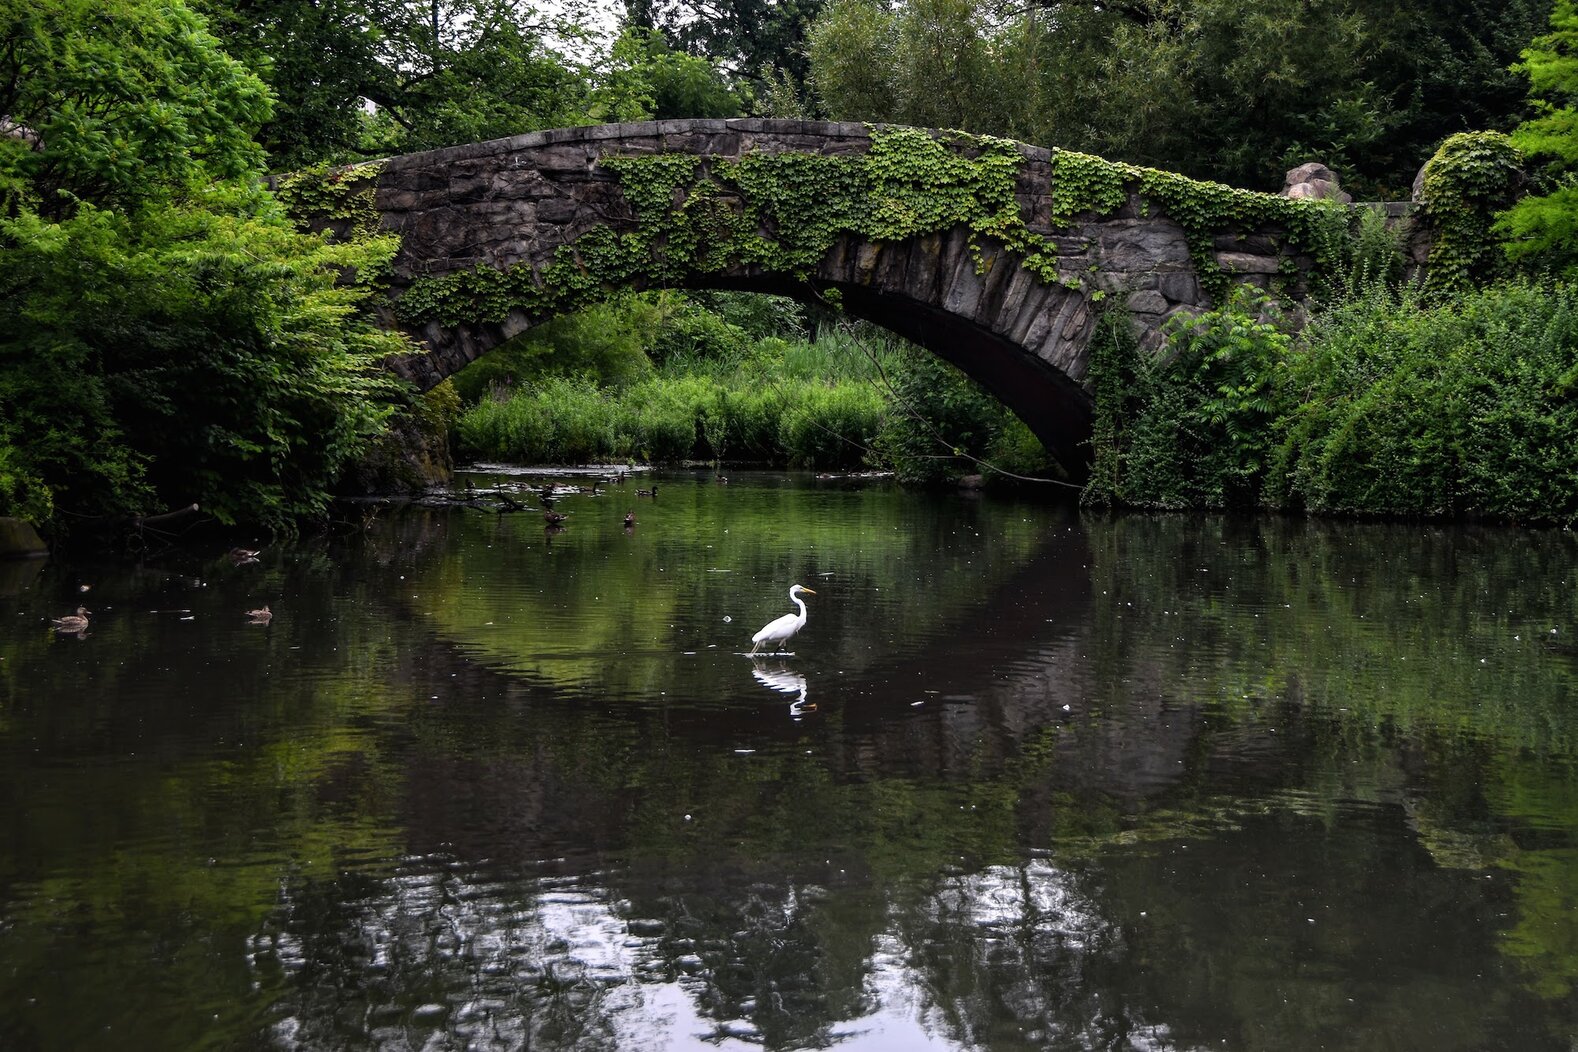 A Great Egret forages with waterfowl in the Pond, by the Gapstow Bridge. Photo: <a href="https://www.flickr.com/photos/larrycloss/" target="_blank">Larry Closs</a>